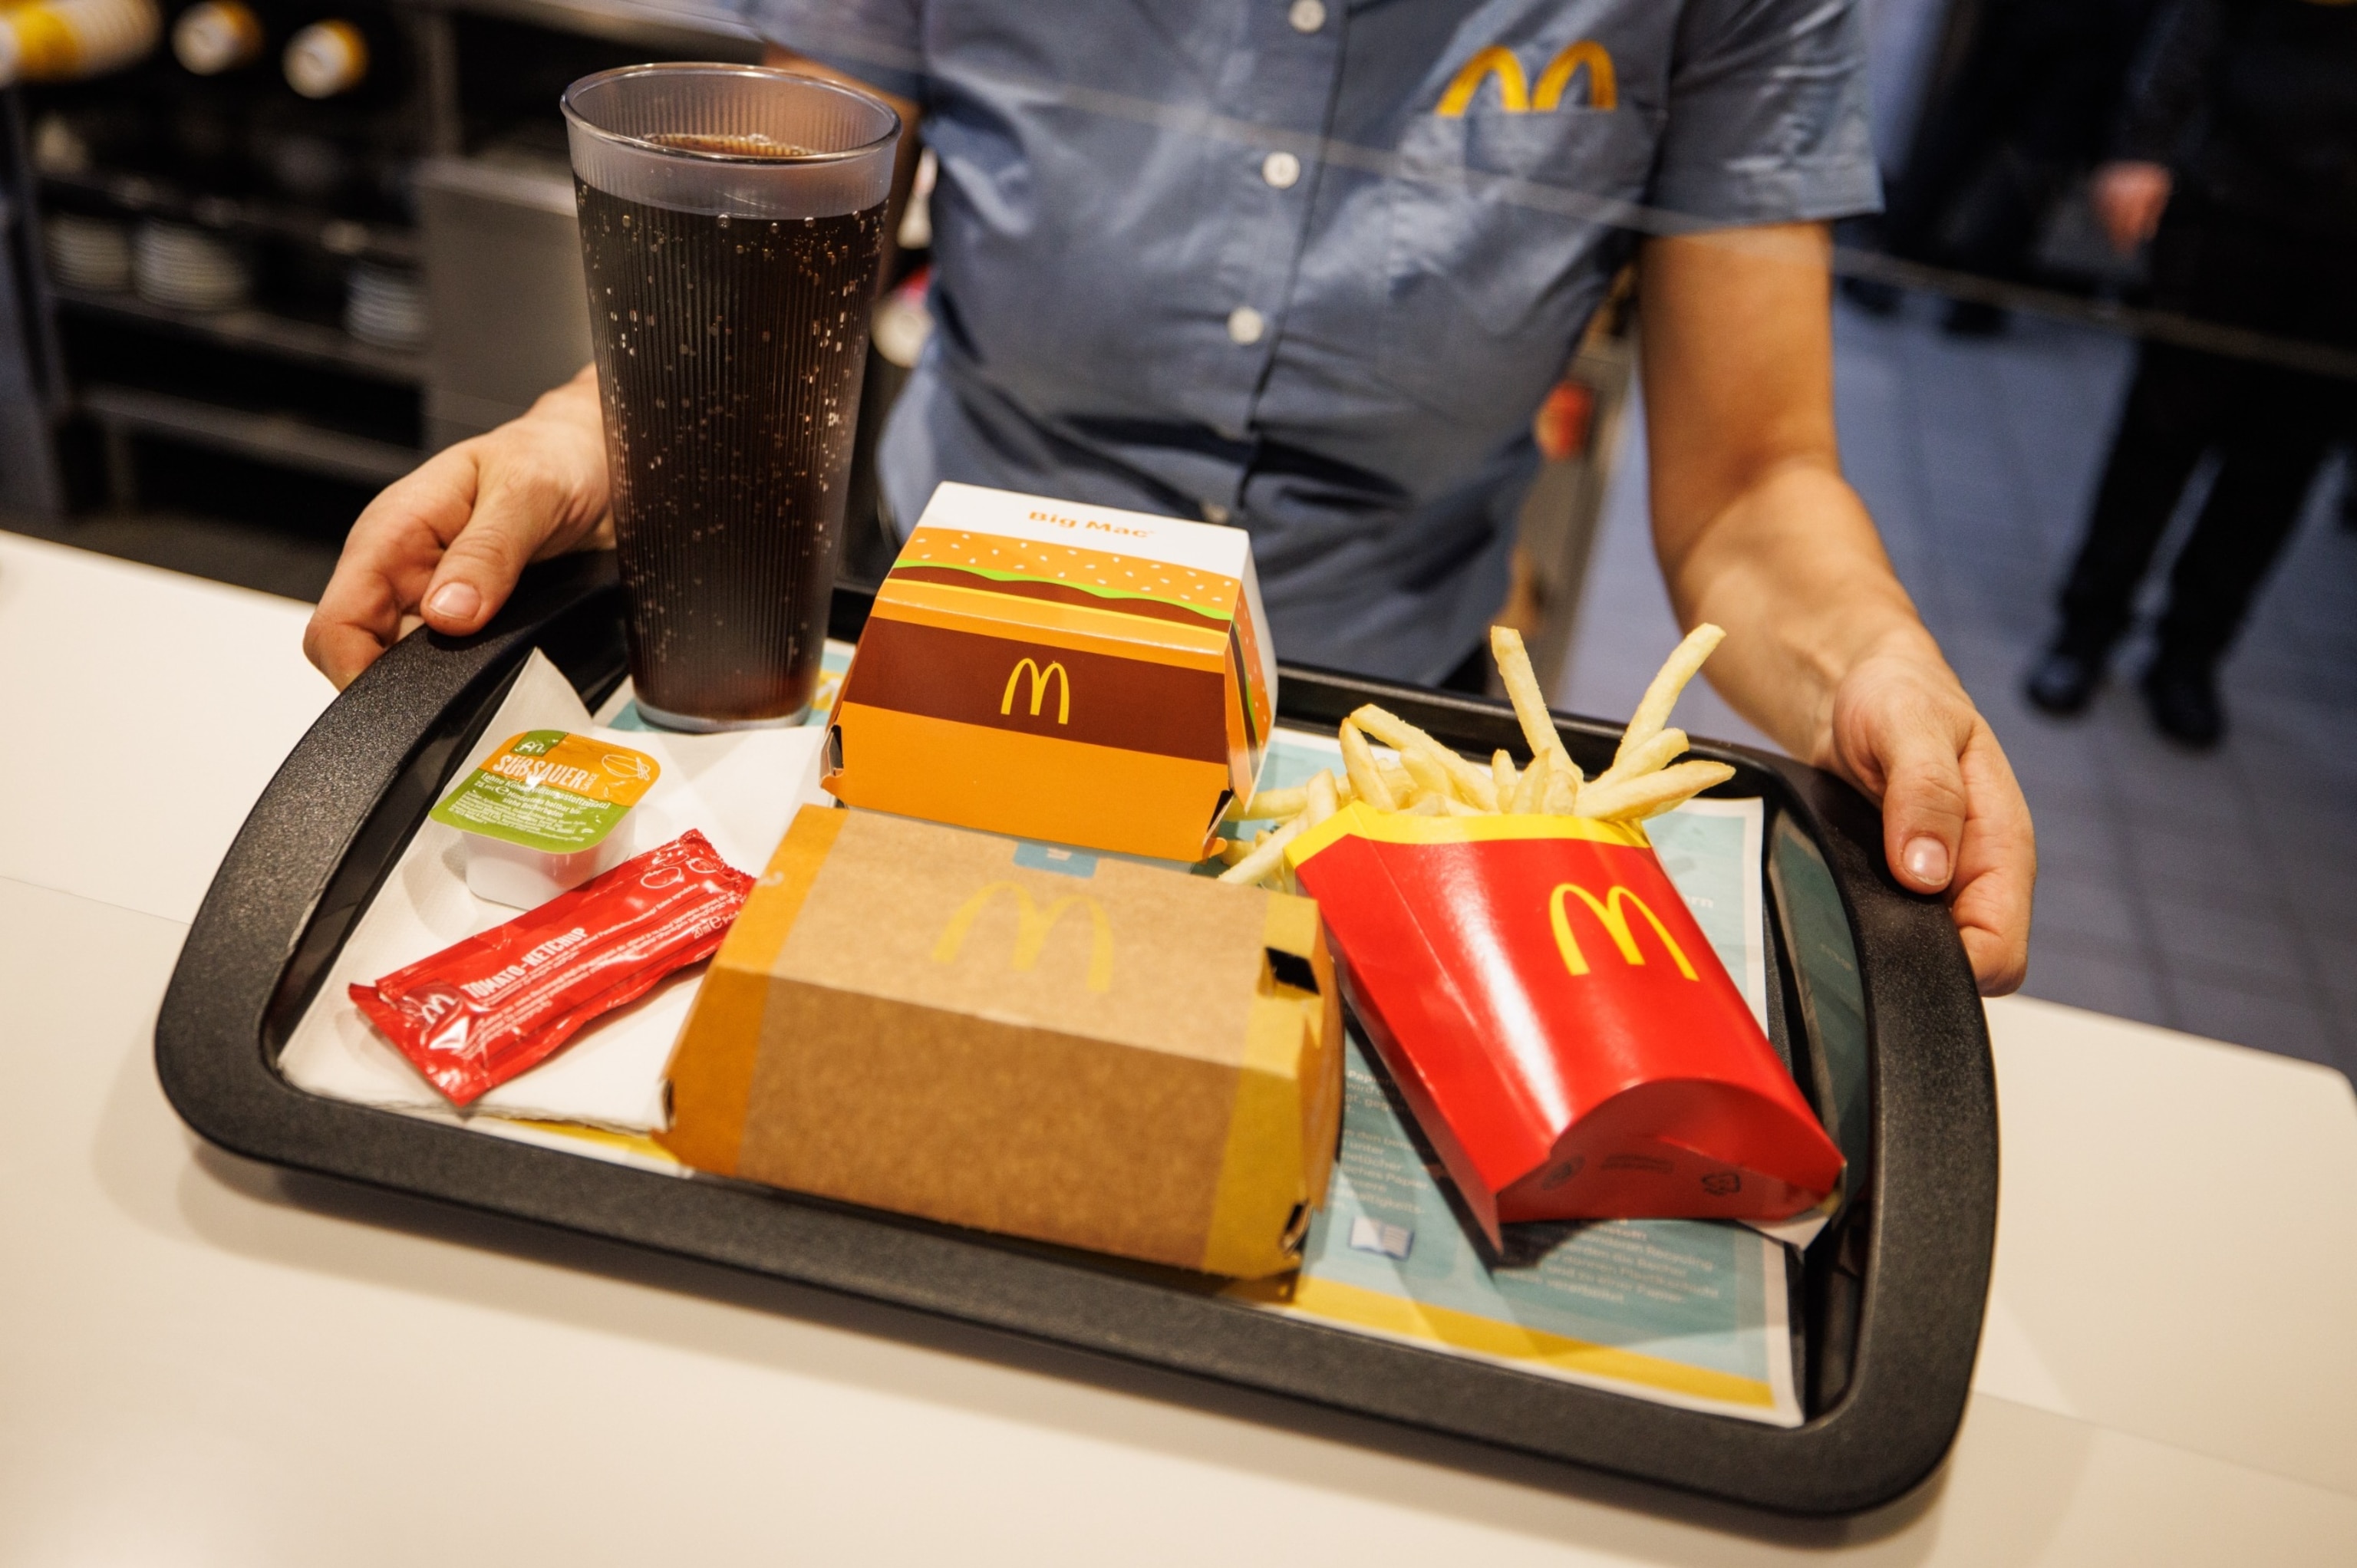 PHOTO: An employee hands over a tray at a McDonald's, Dec. 2, 2021, in Bavaria, Munich.